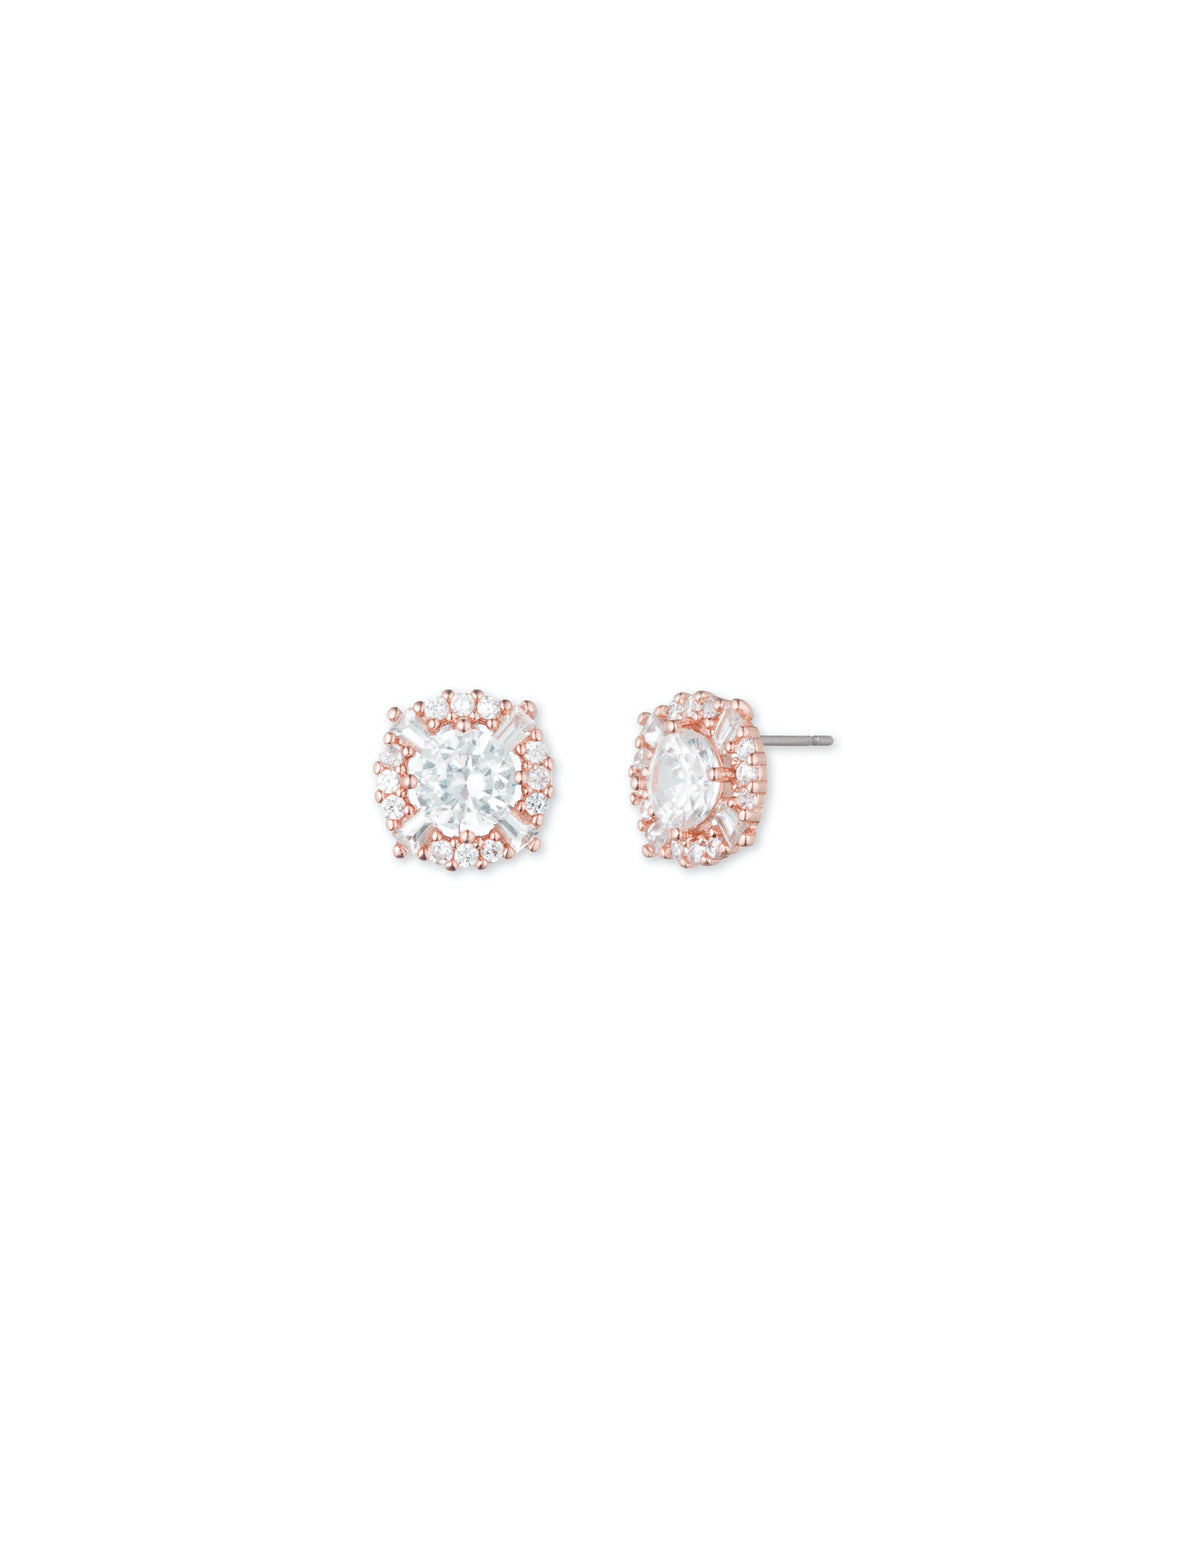 Anne Klein Rose Gold-Tone Cubic Zirconia Pave Halo Earrings